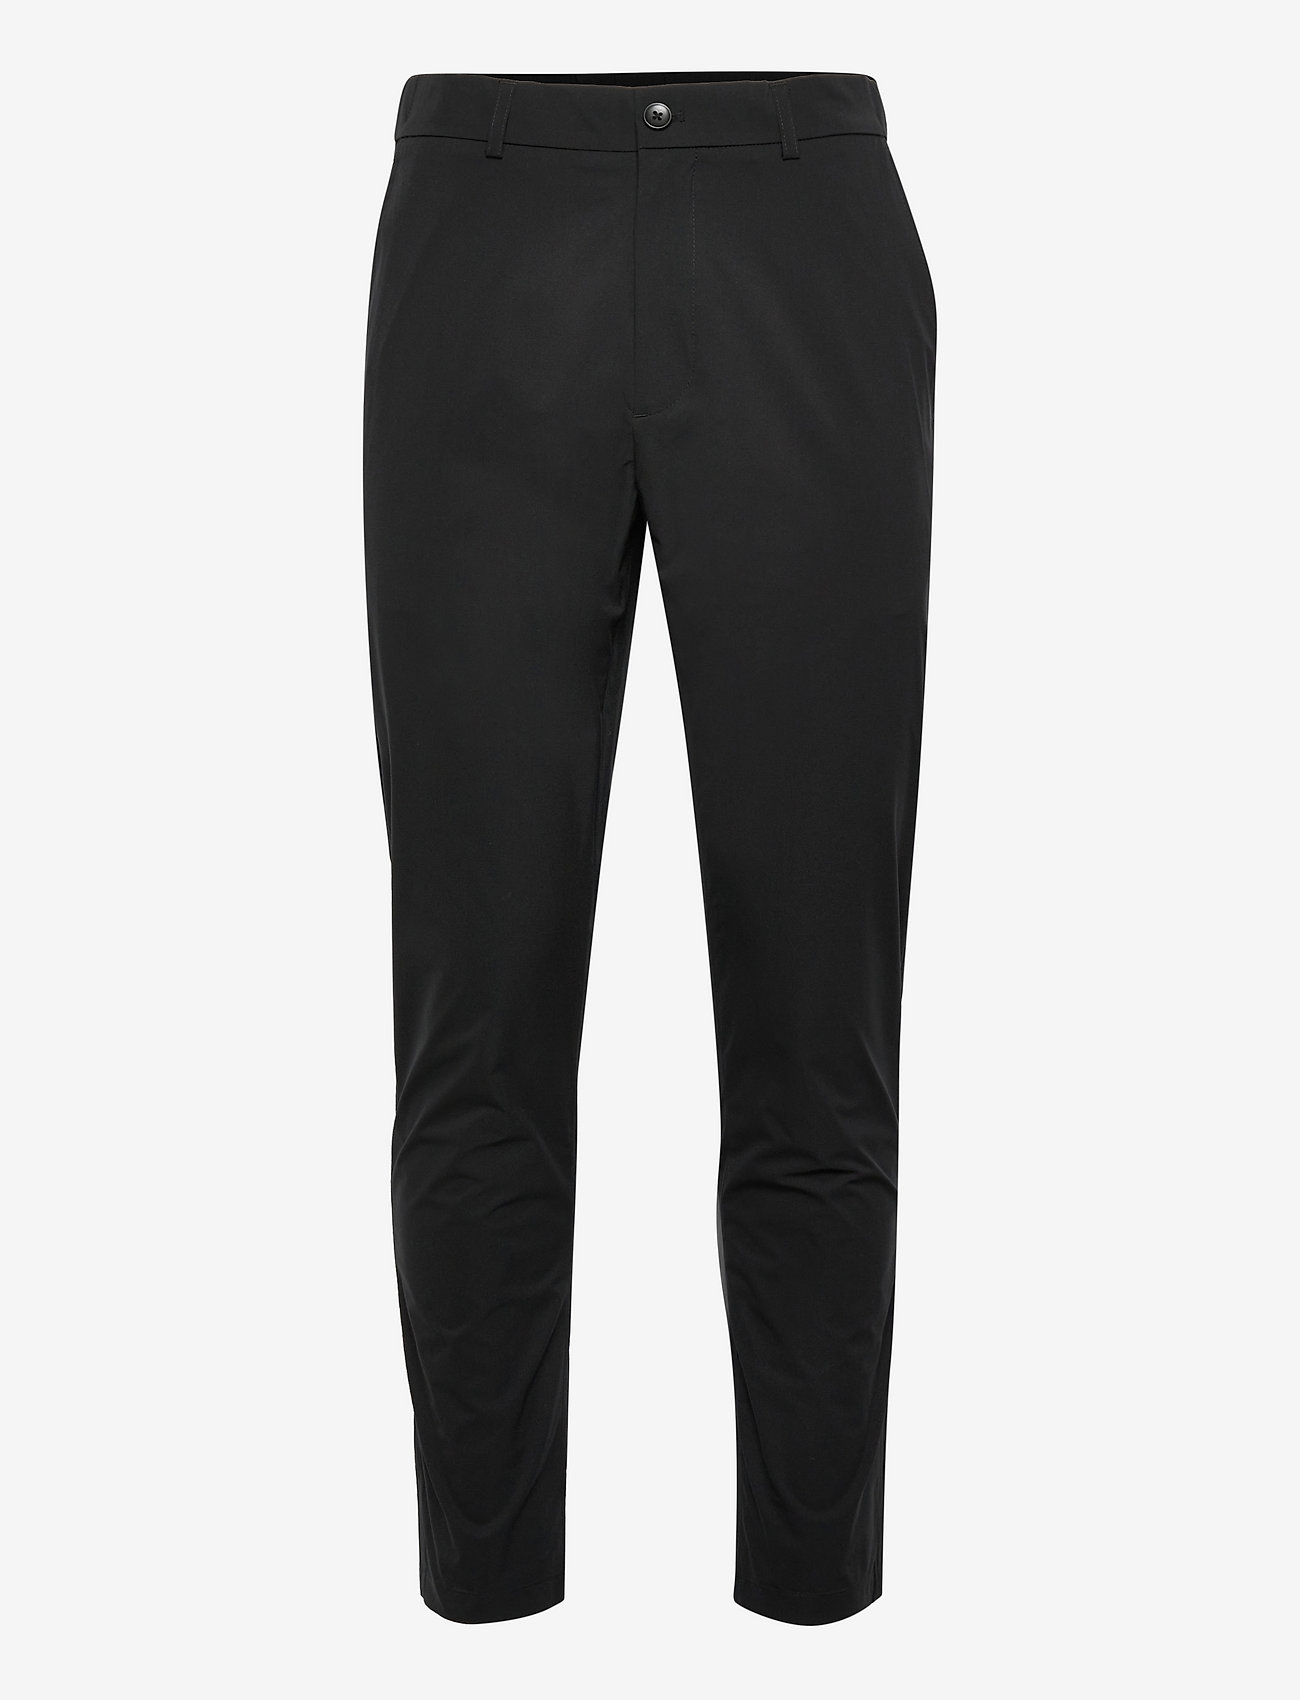 Esprit Collection - #ReimagineFlexibility: breathable trousers - chinot - black - 0